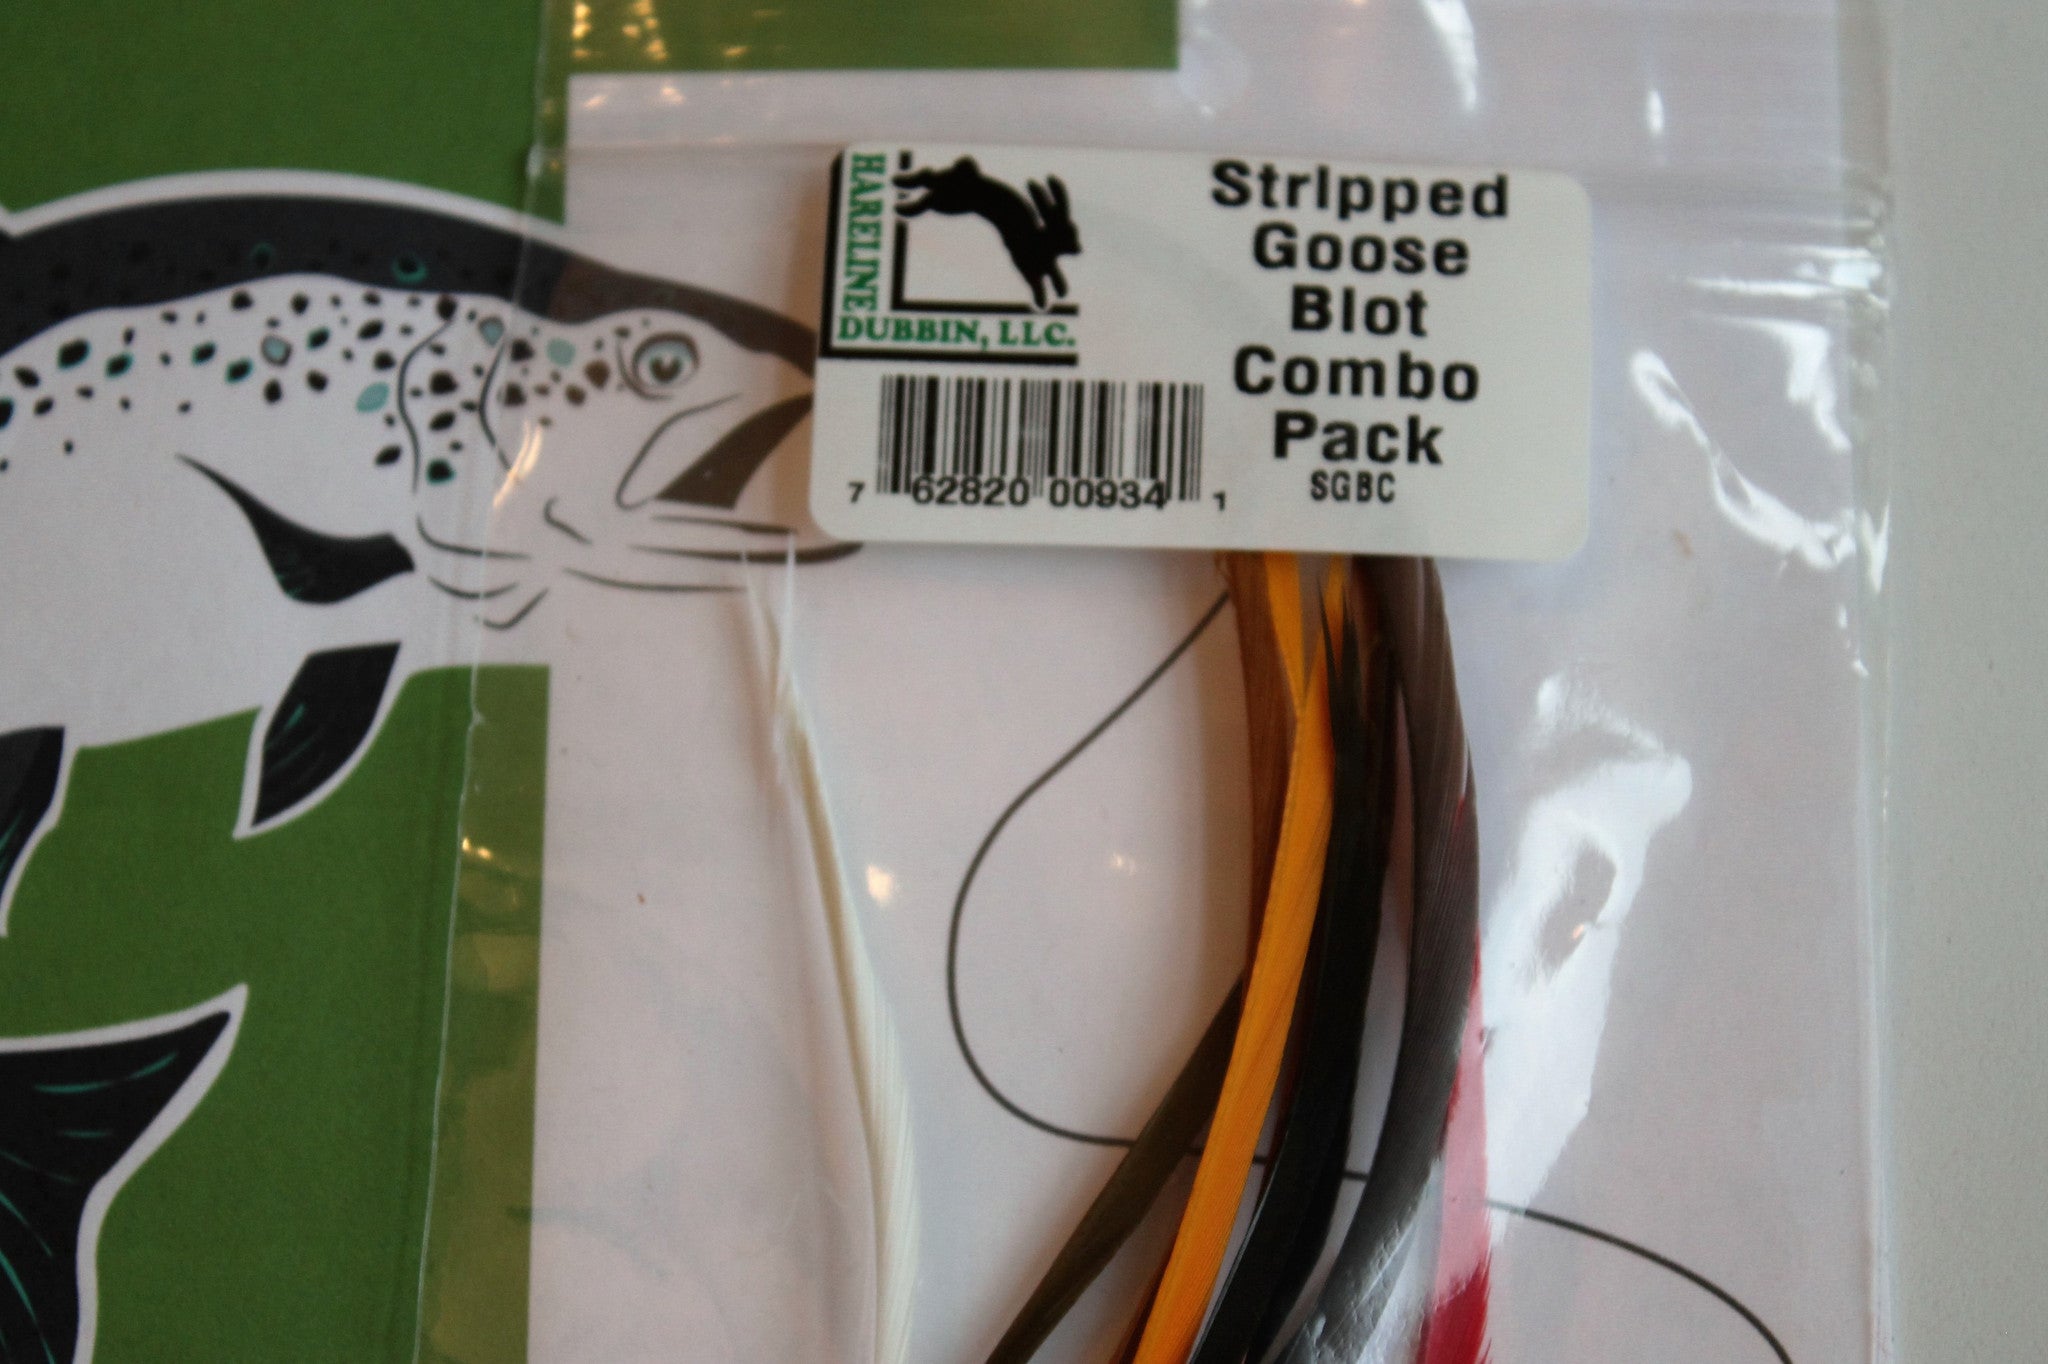 Stripped Goose Biots Combo Pack